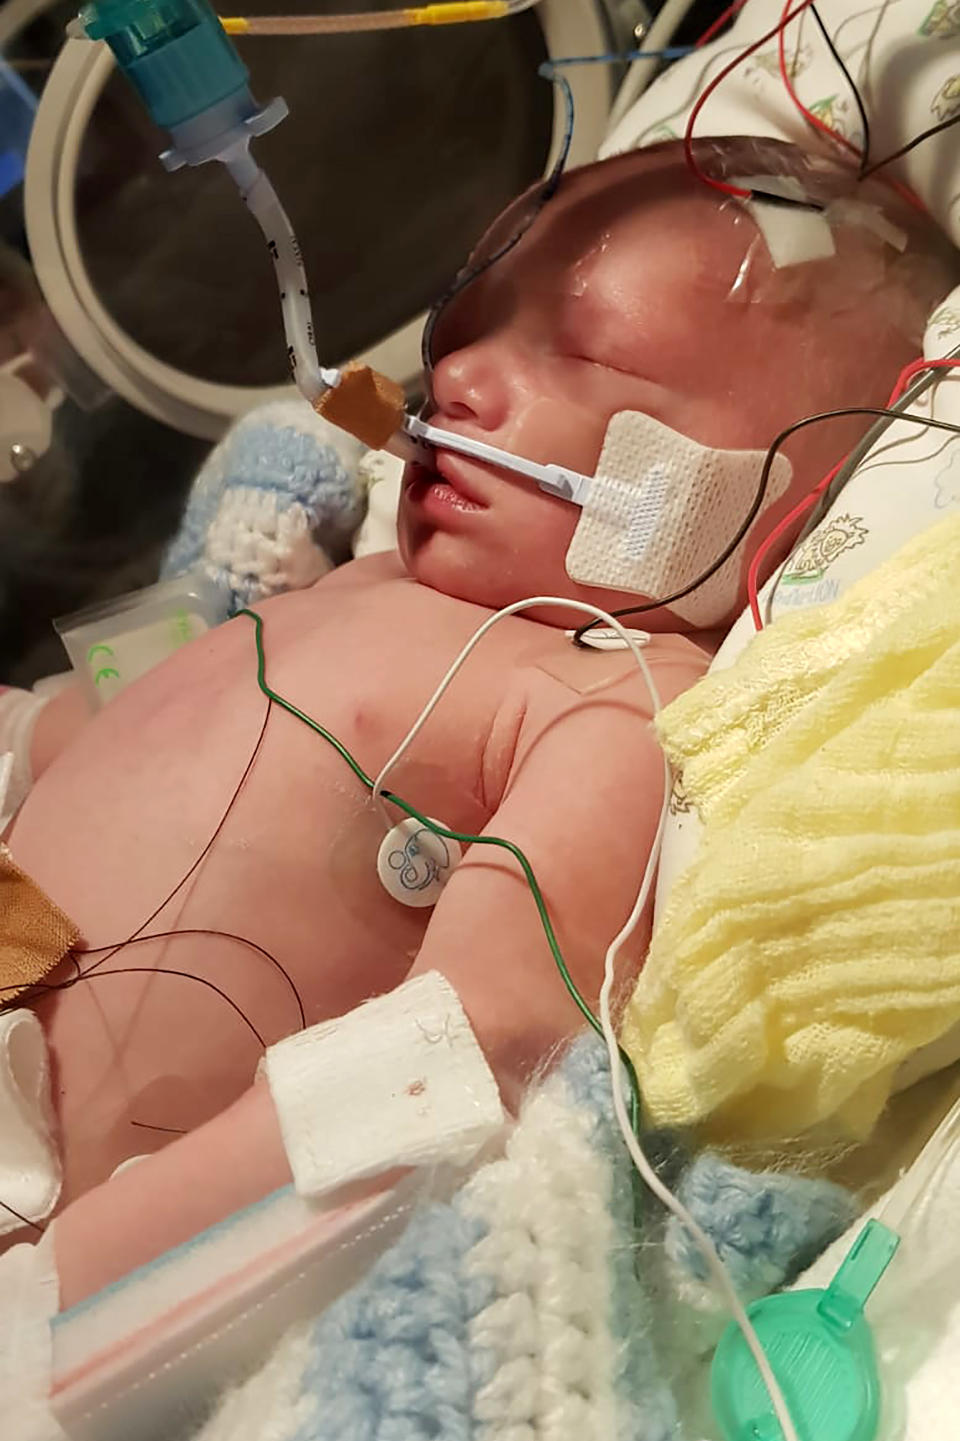 Logan was diagnosed with Alagille syndrome shortly after his birth in December 2018. (Caters)